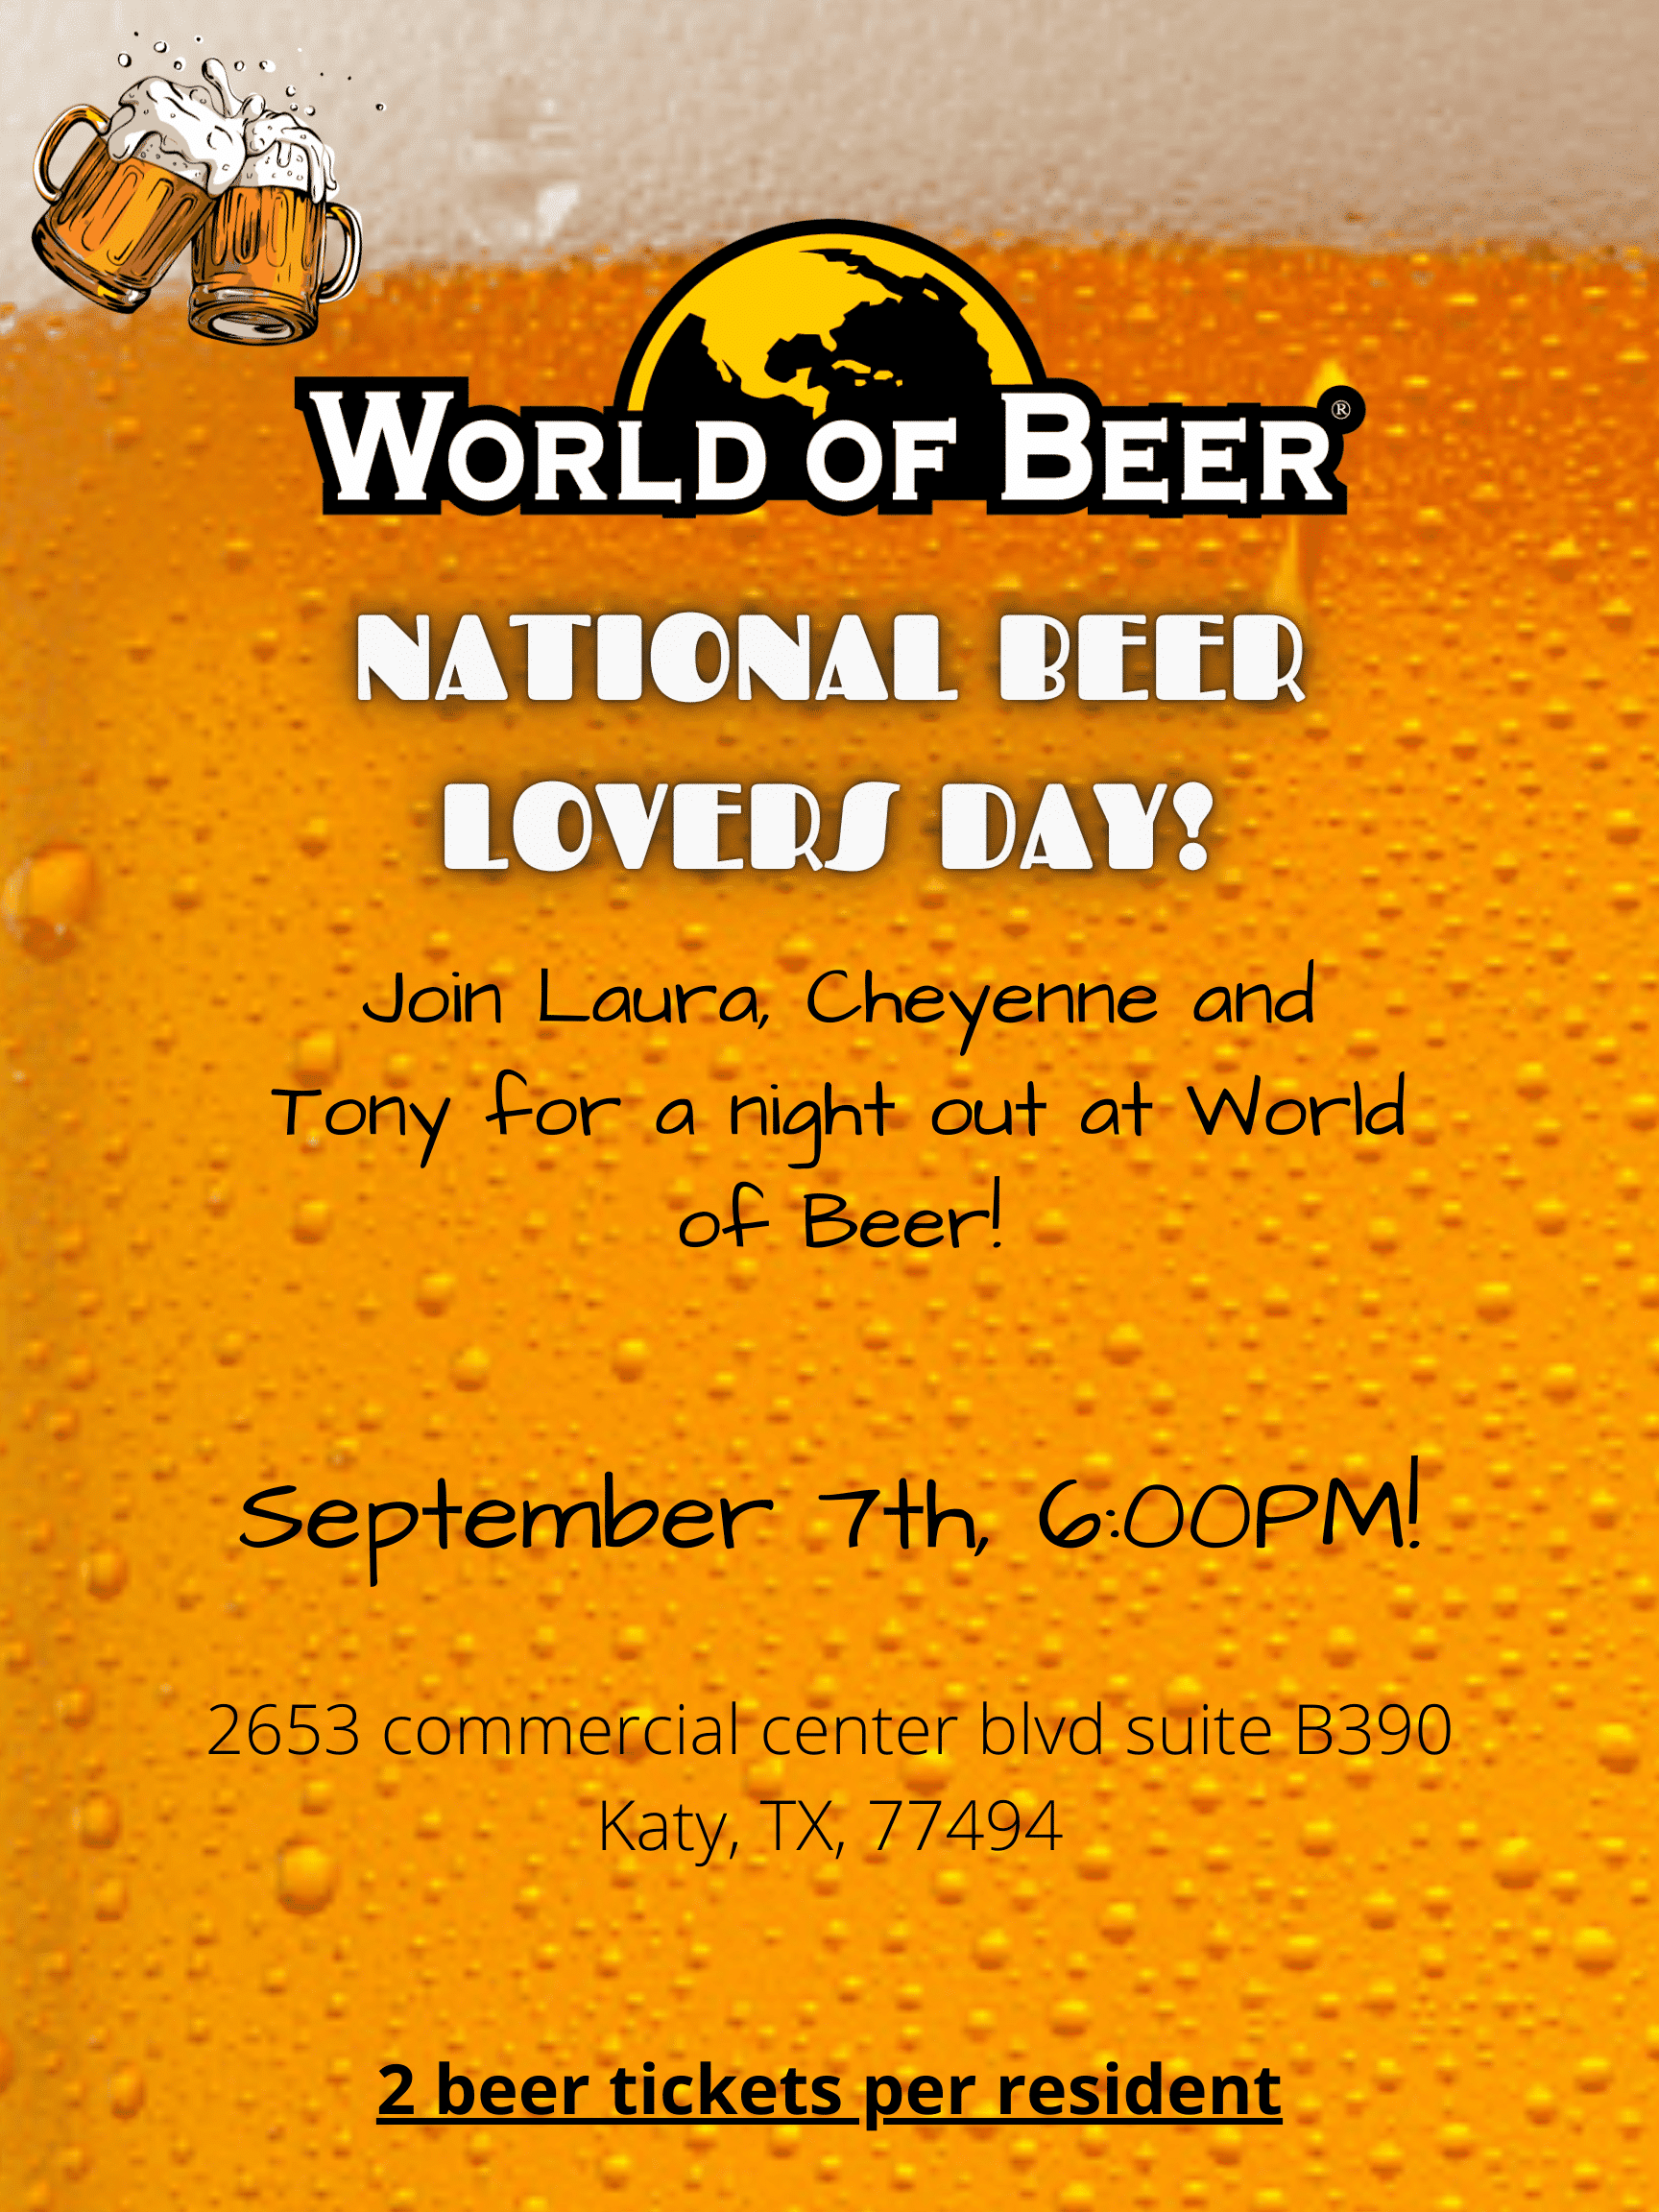 Celebrate National Beer Lovers Day at World of Beer in Katy, TX!